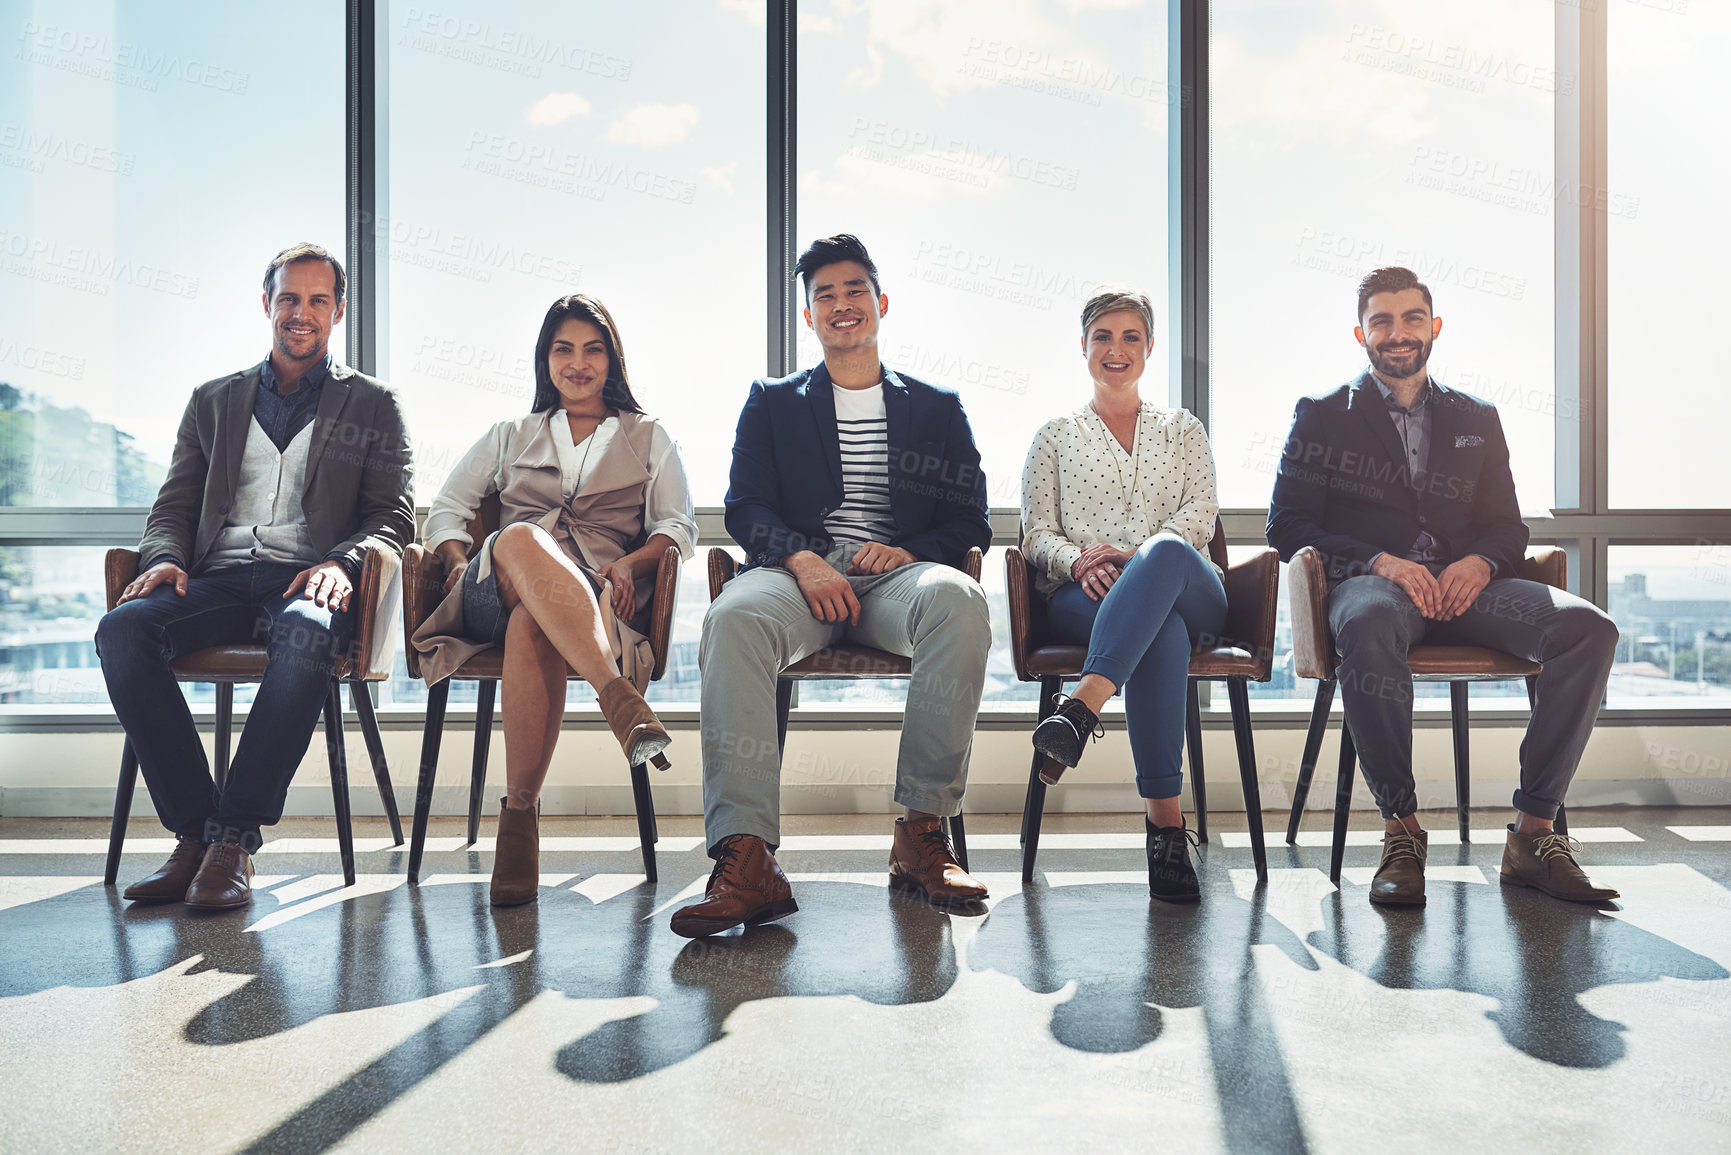 Buy stock photo Portrait of a group of businesspeople sitting in line in an office